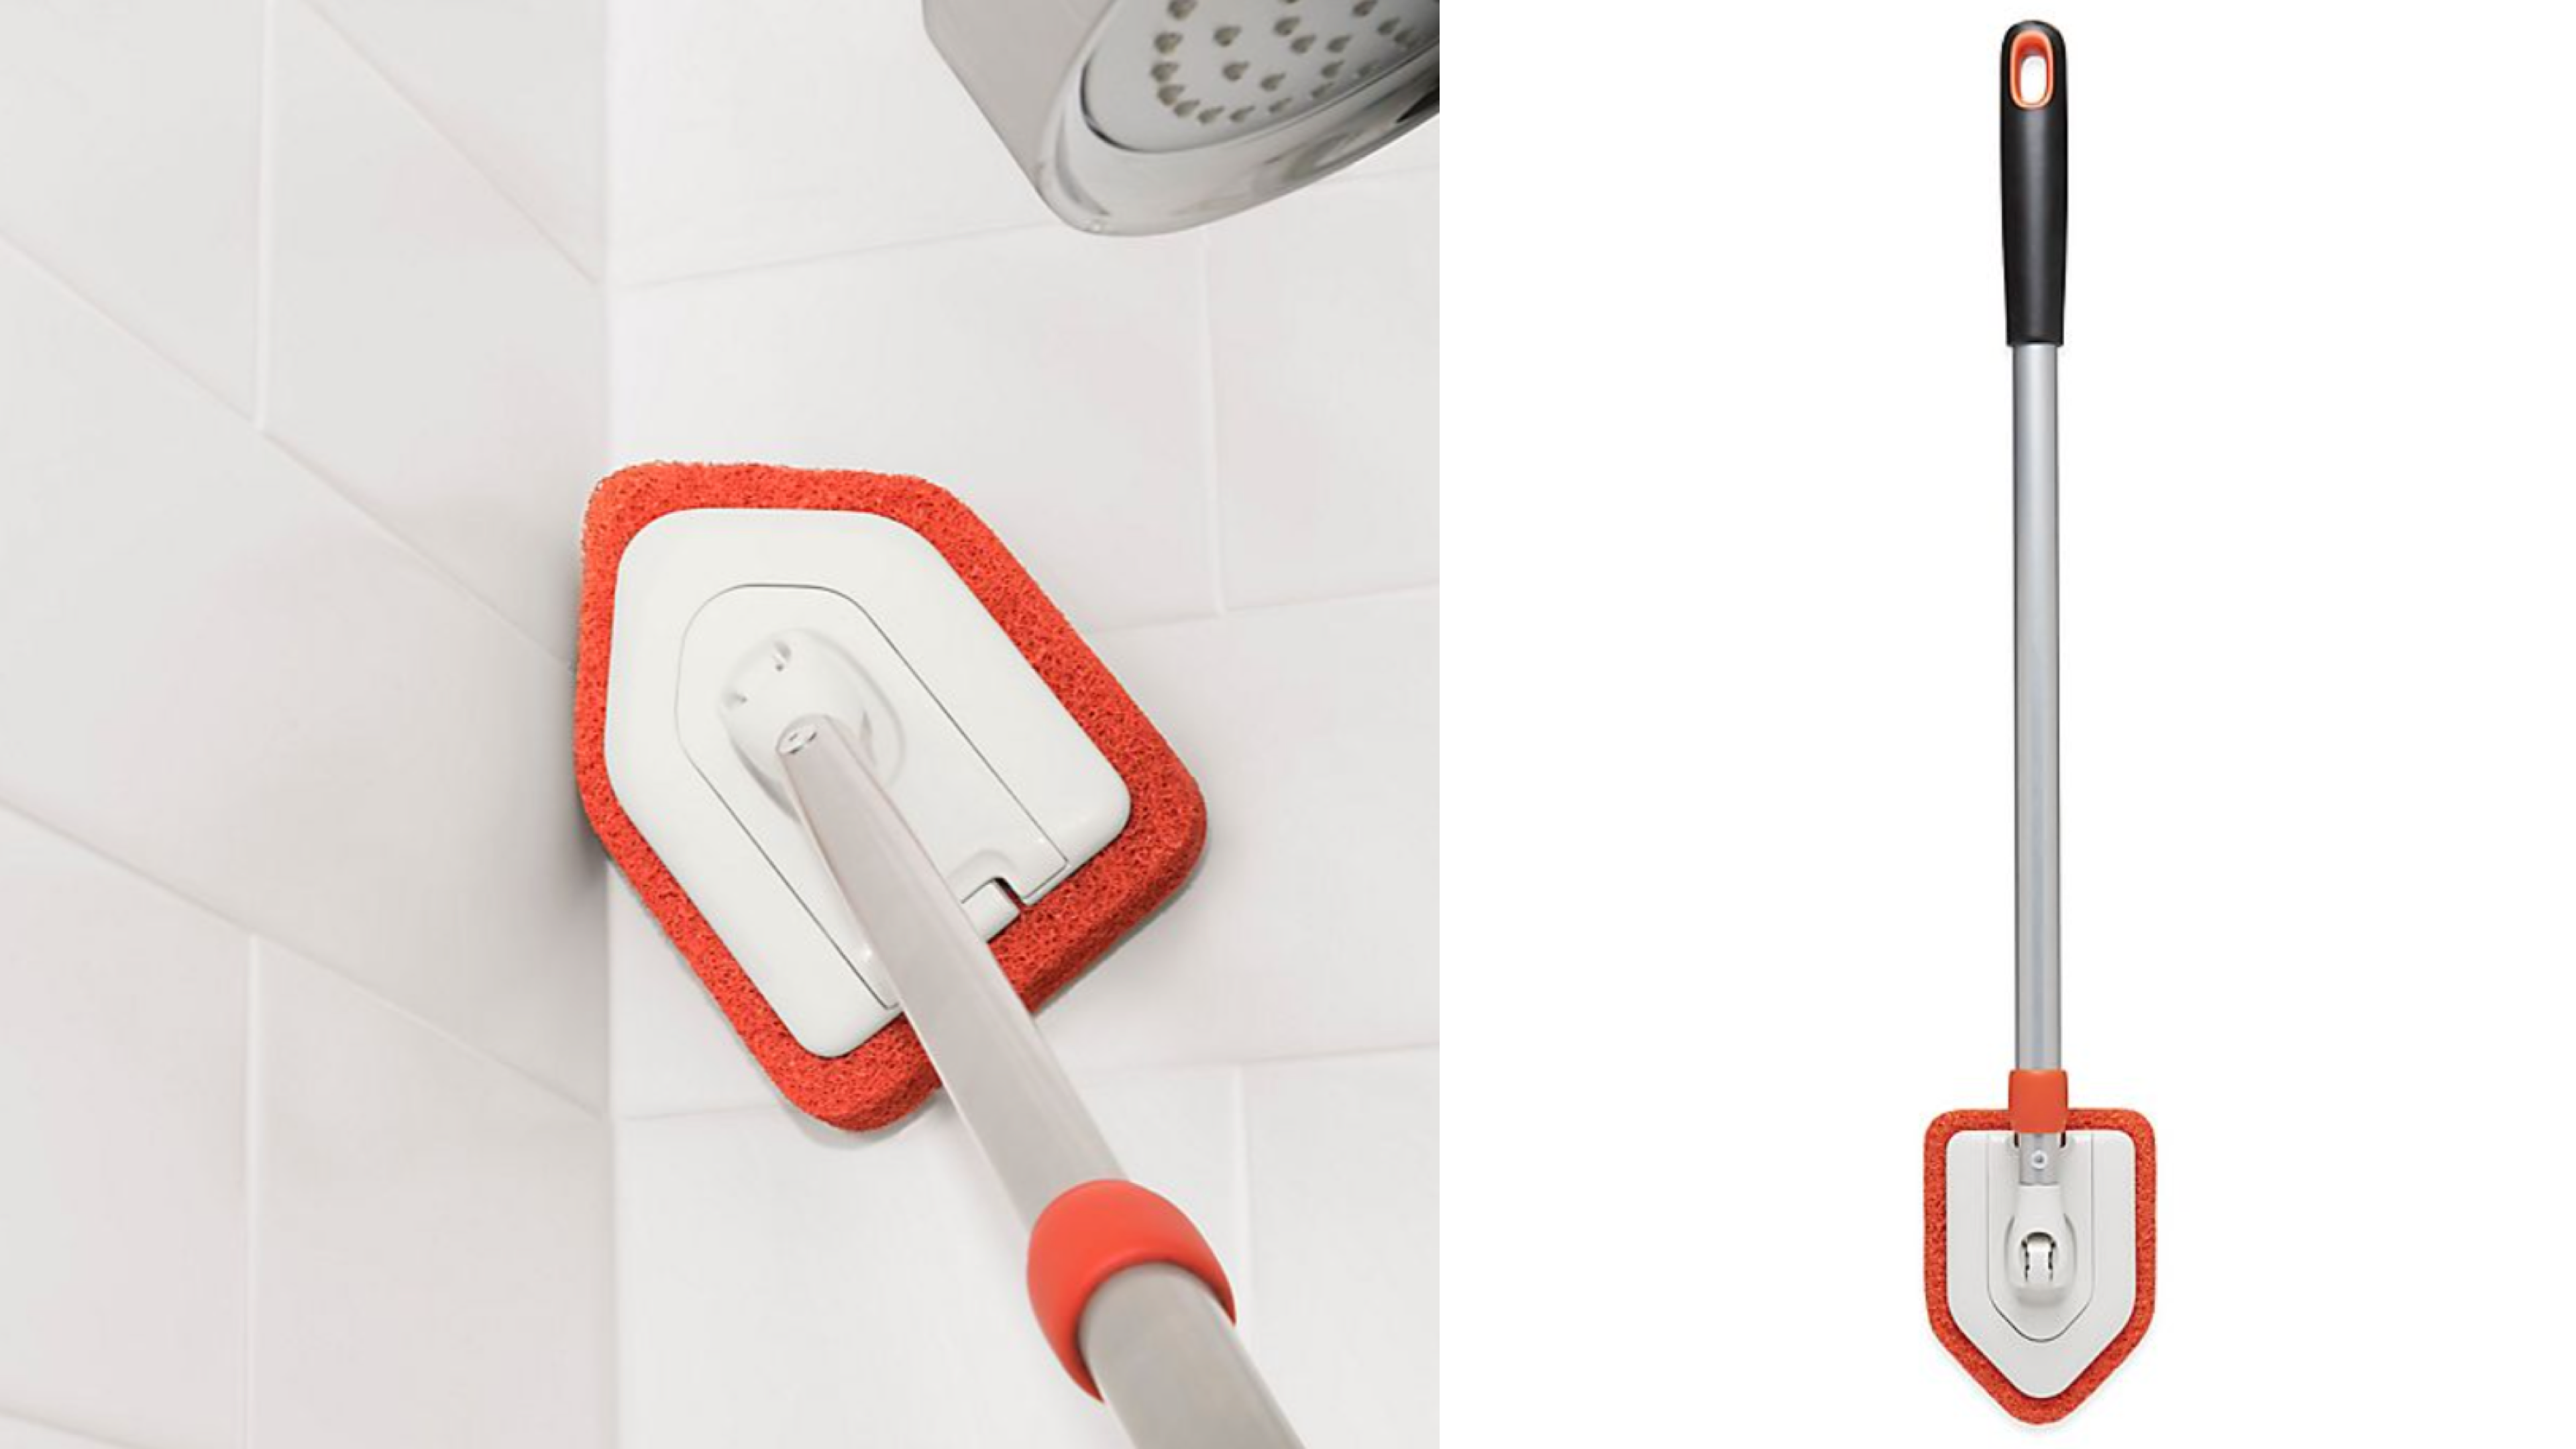 scrubbing brush with extendable arm to reach high-up areas